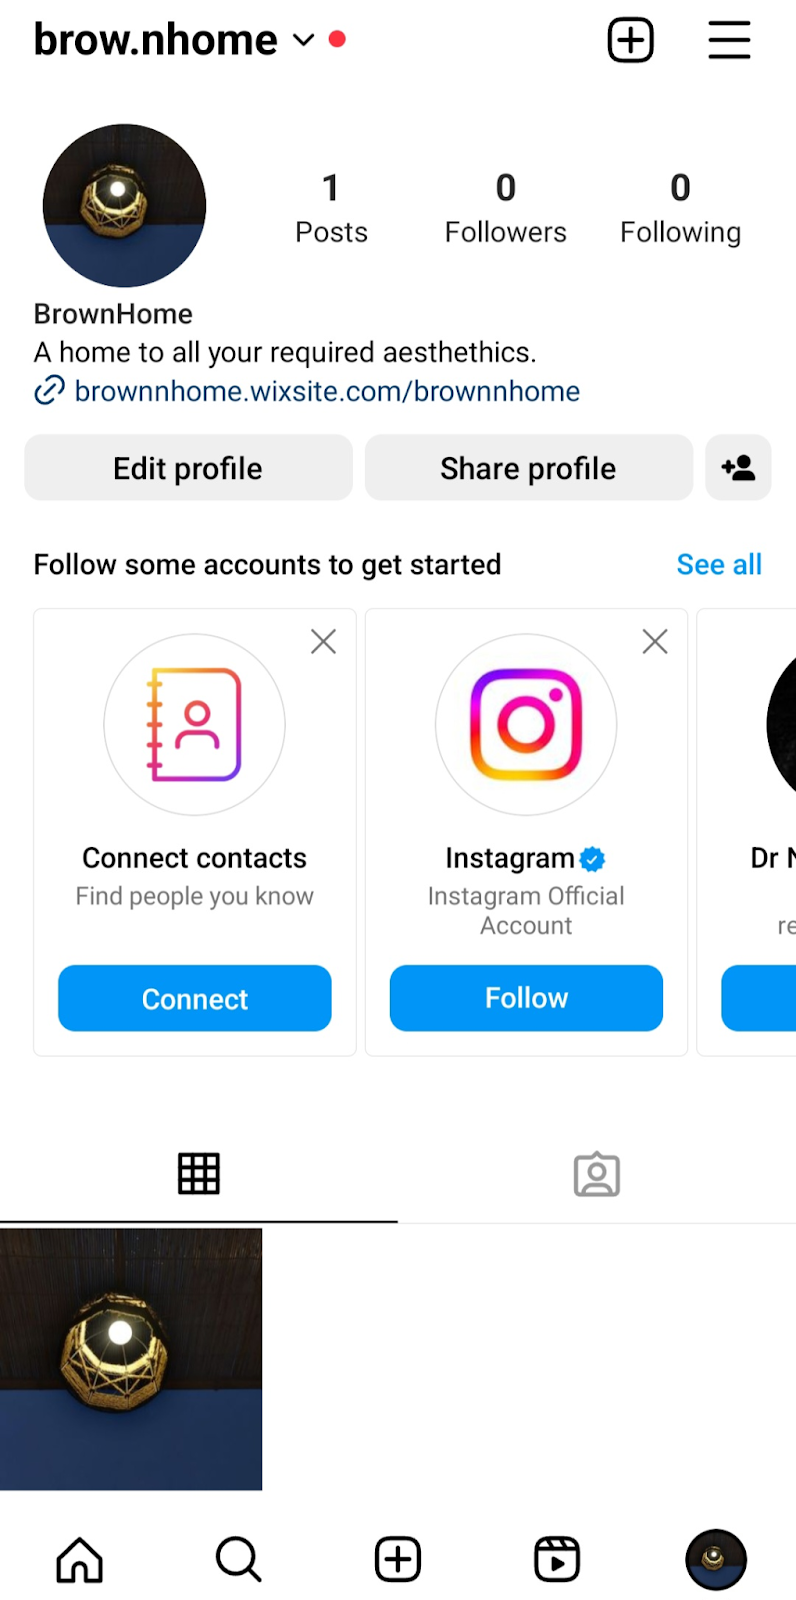 How to add a link in bio on instagram?